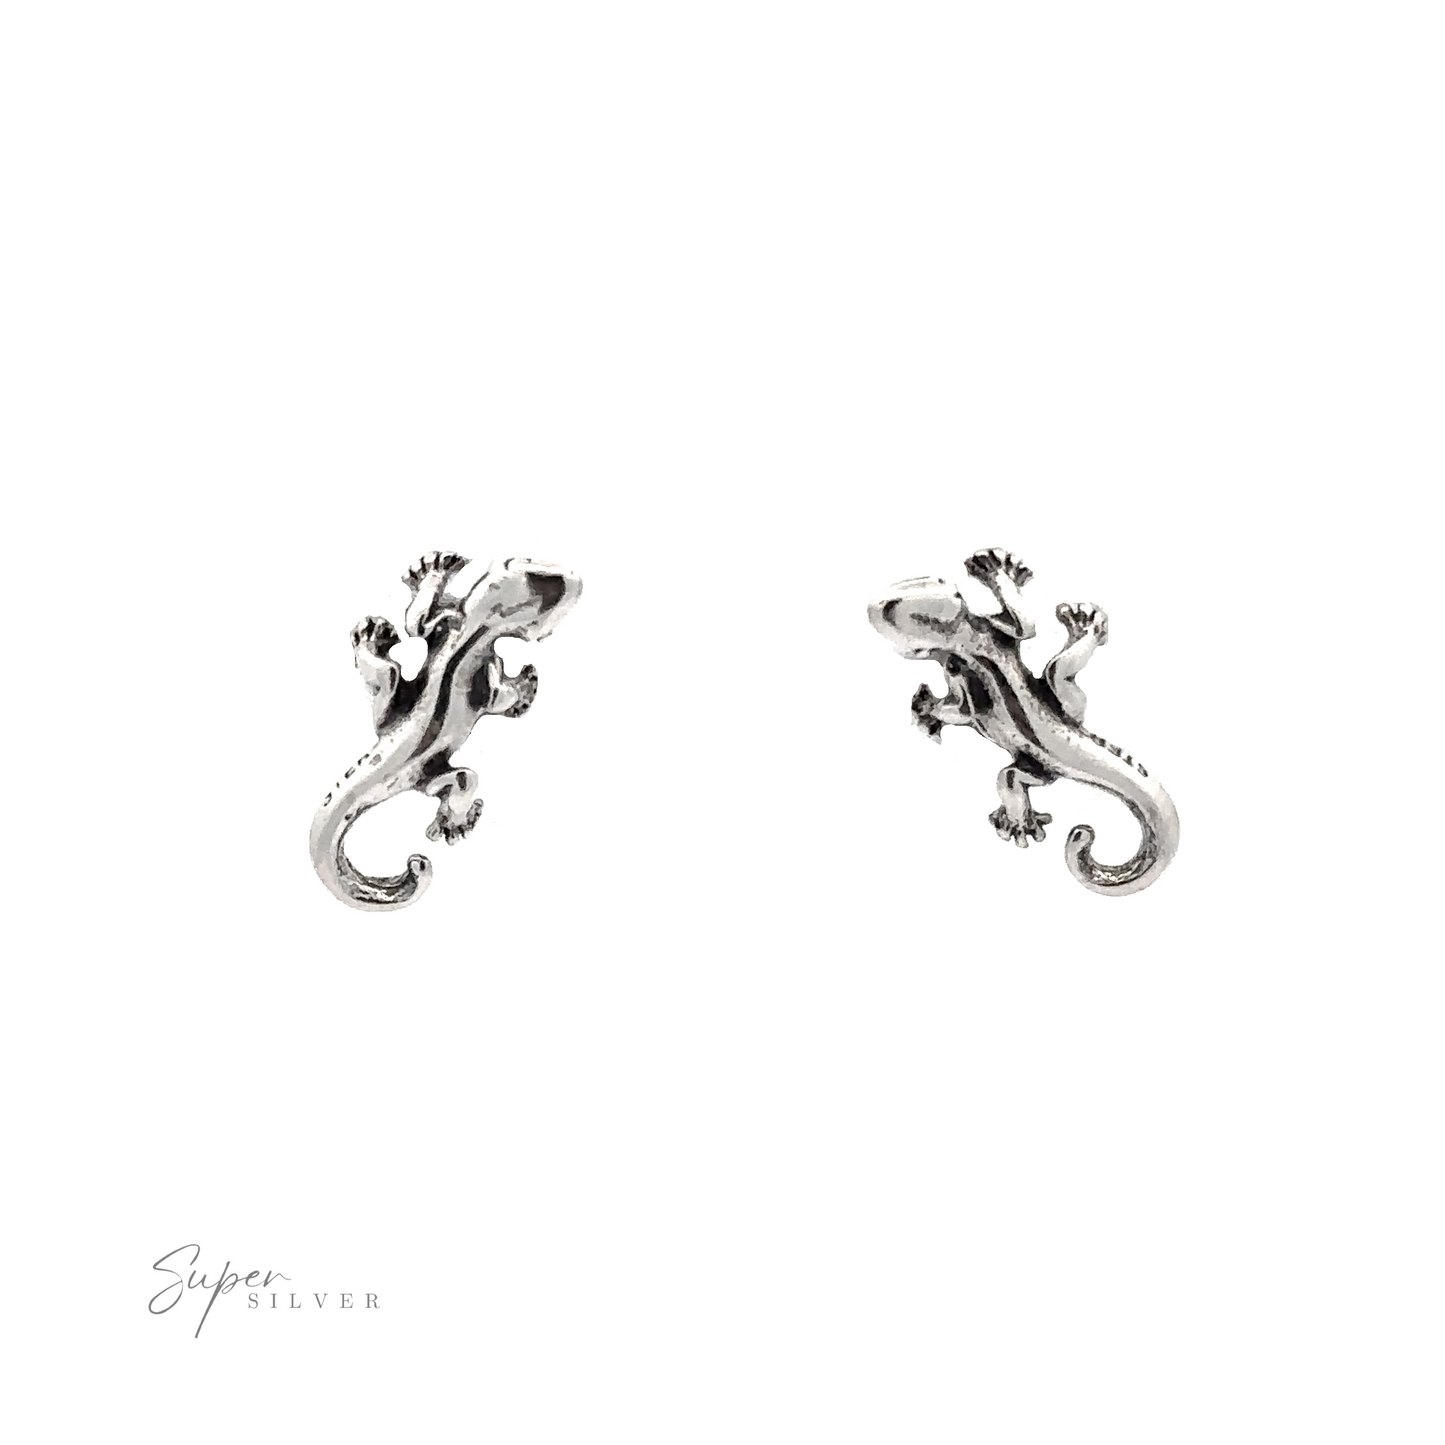 A pair of silver lizard stud earrings with a minimal detail.